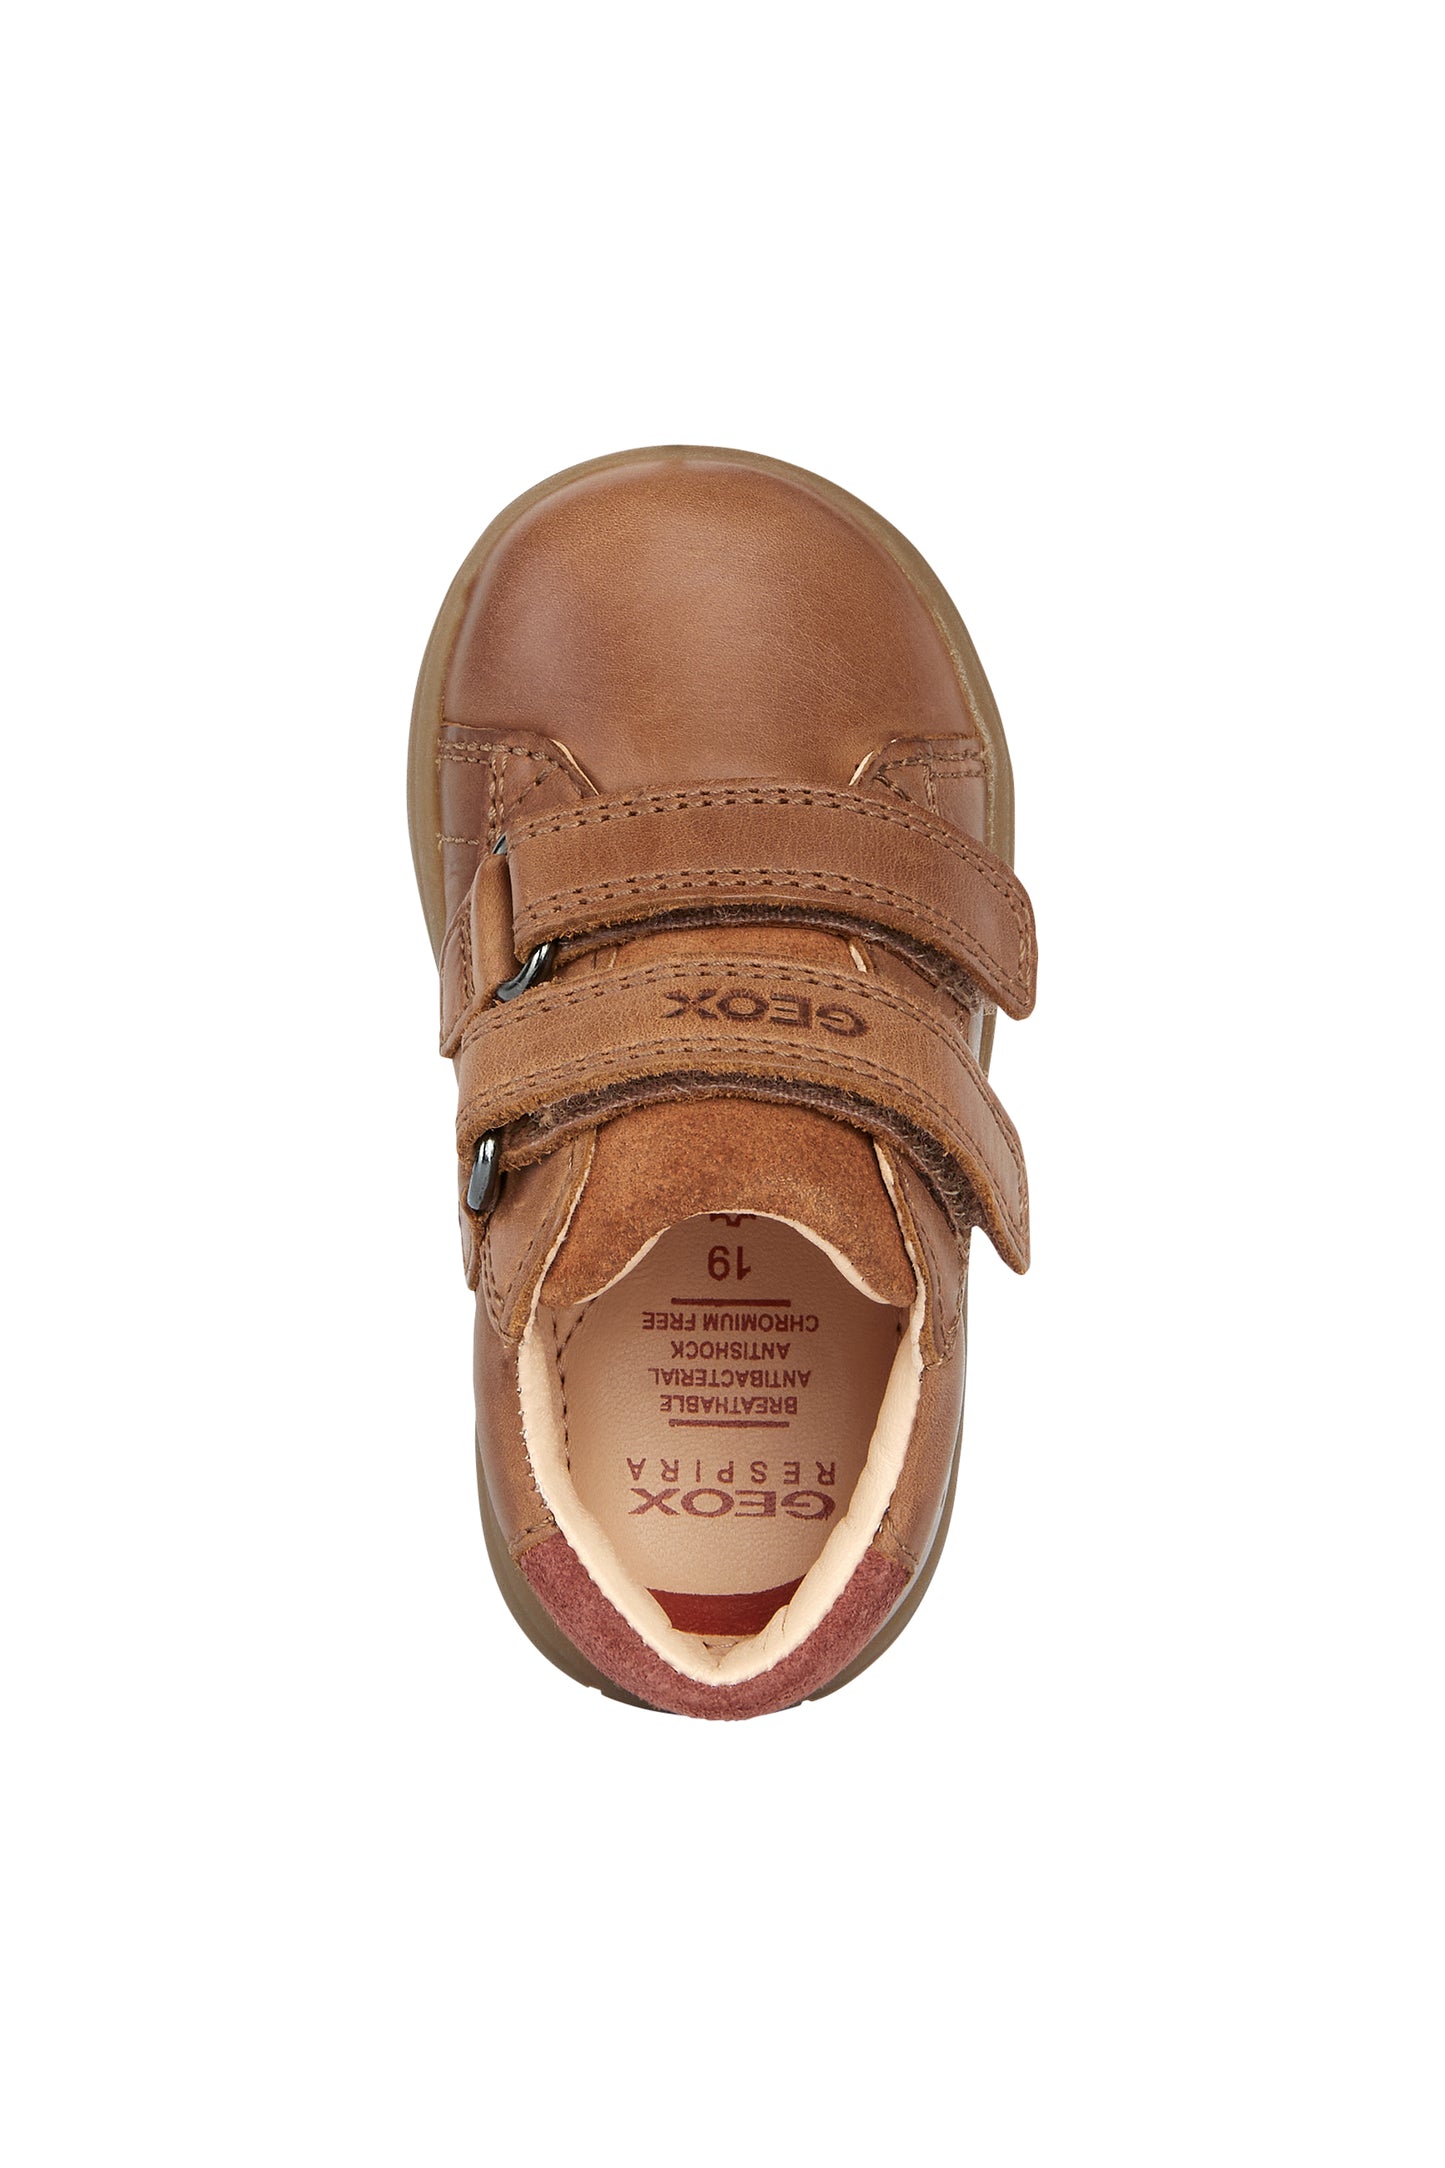 Biglia Baby Boy's Cognac Brown Waxed Leather and Suede Shoe